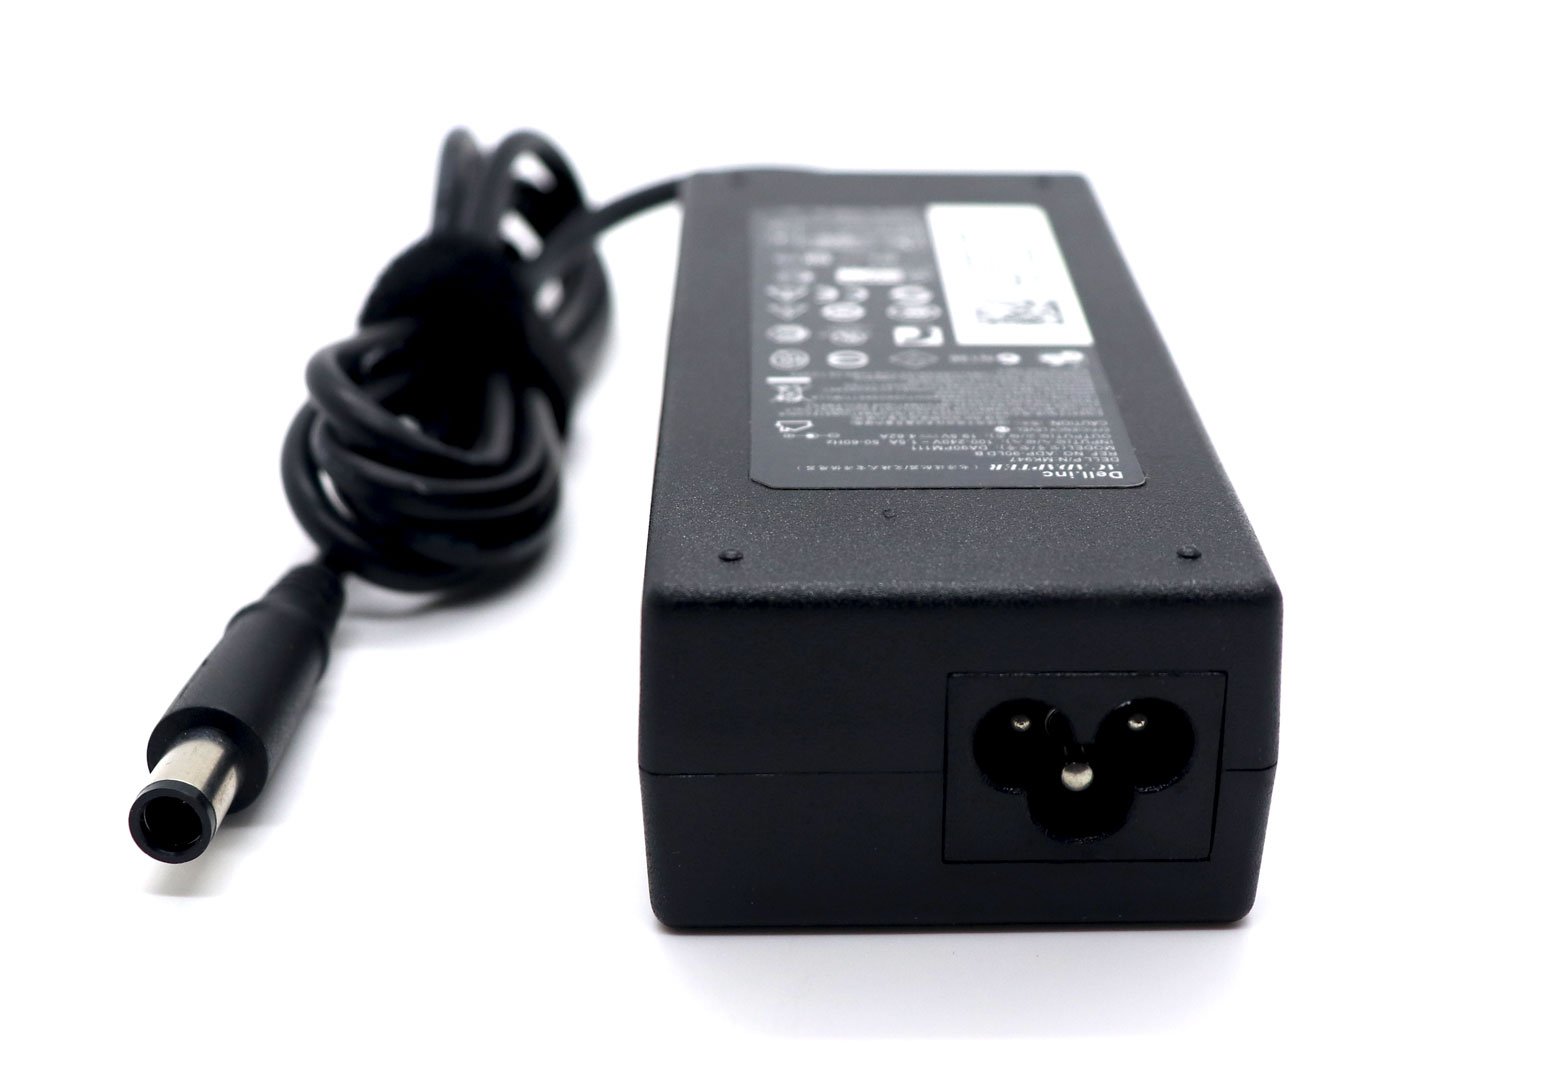 Dell Inspiron  15R N5010 Original 90W 19.5V 4.62A 7.4mm Pin Laptop Charger Adapter